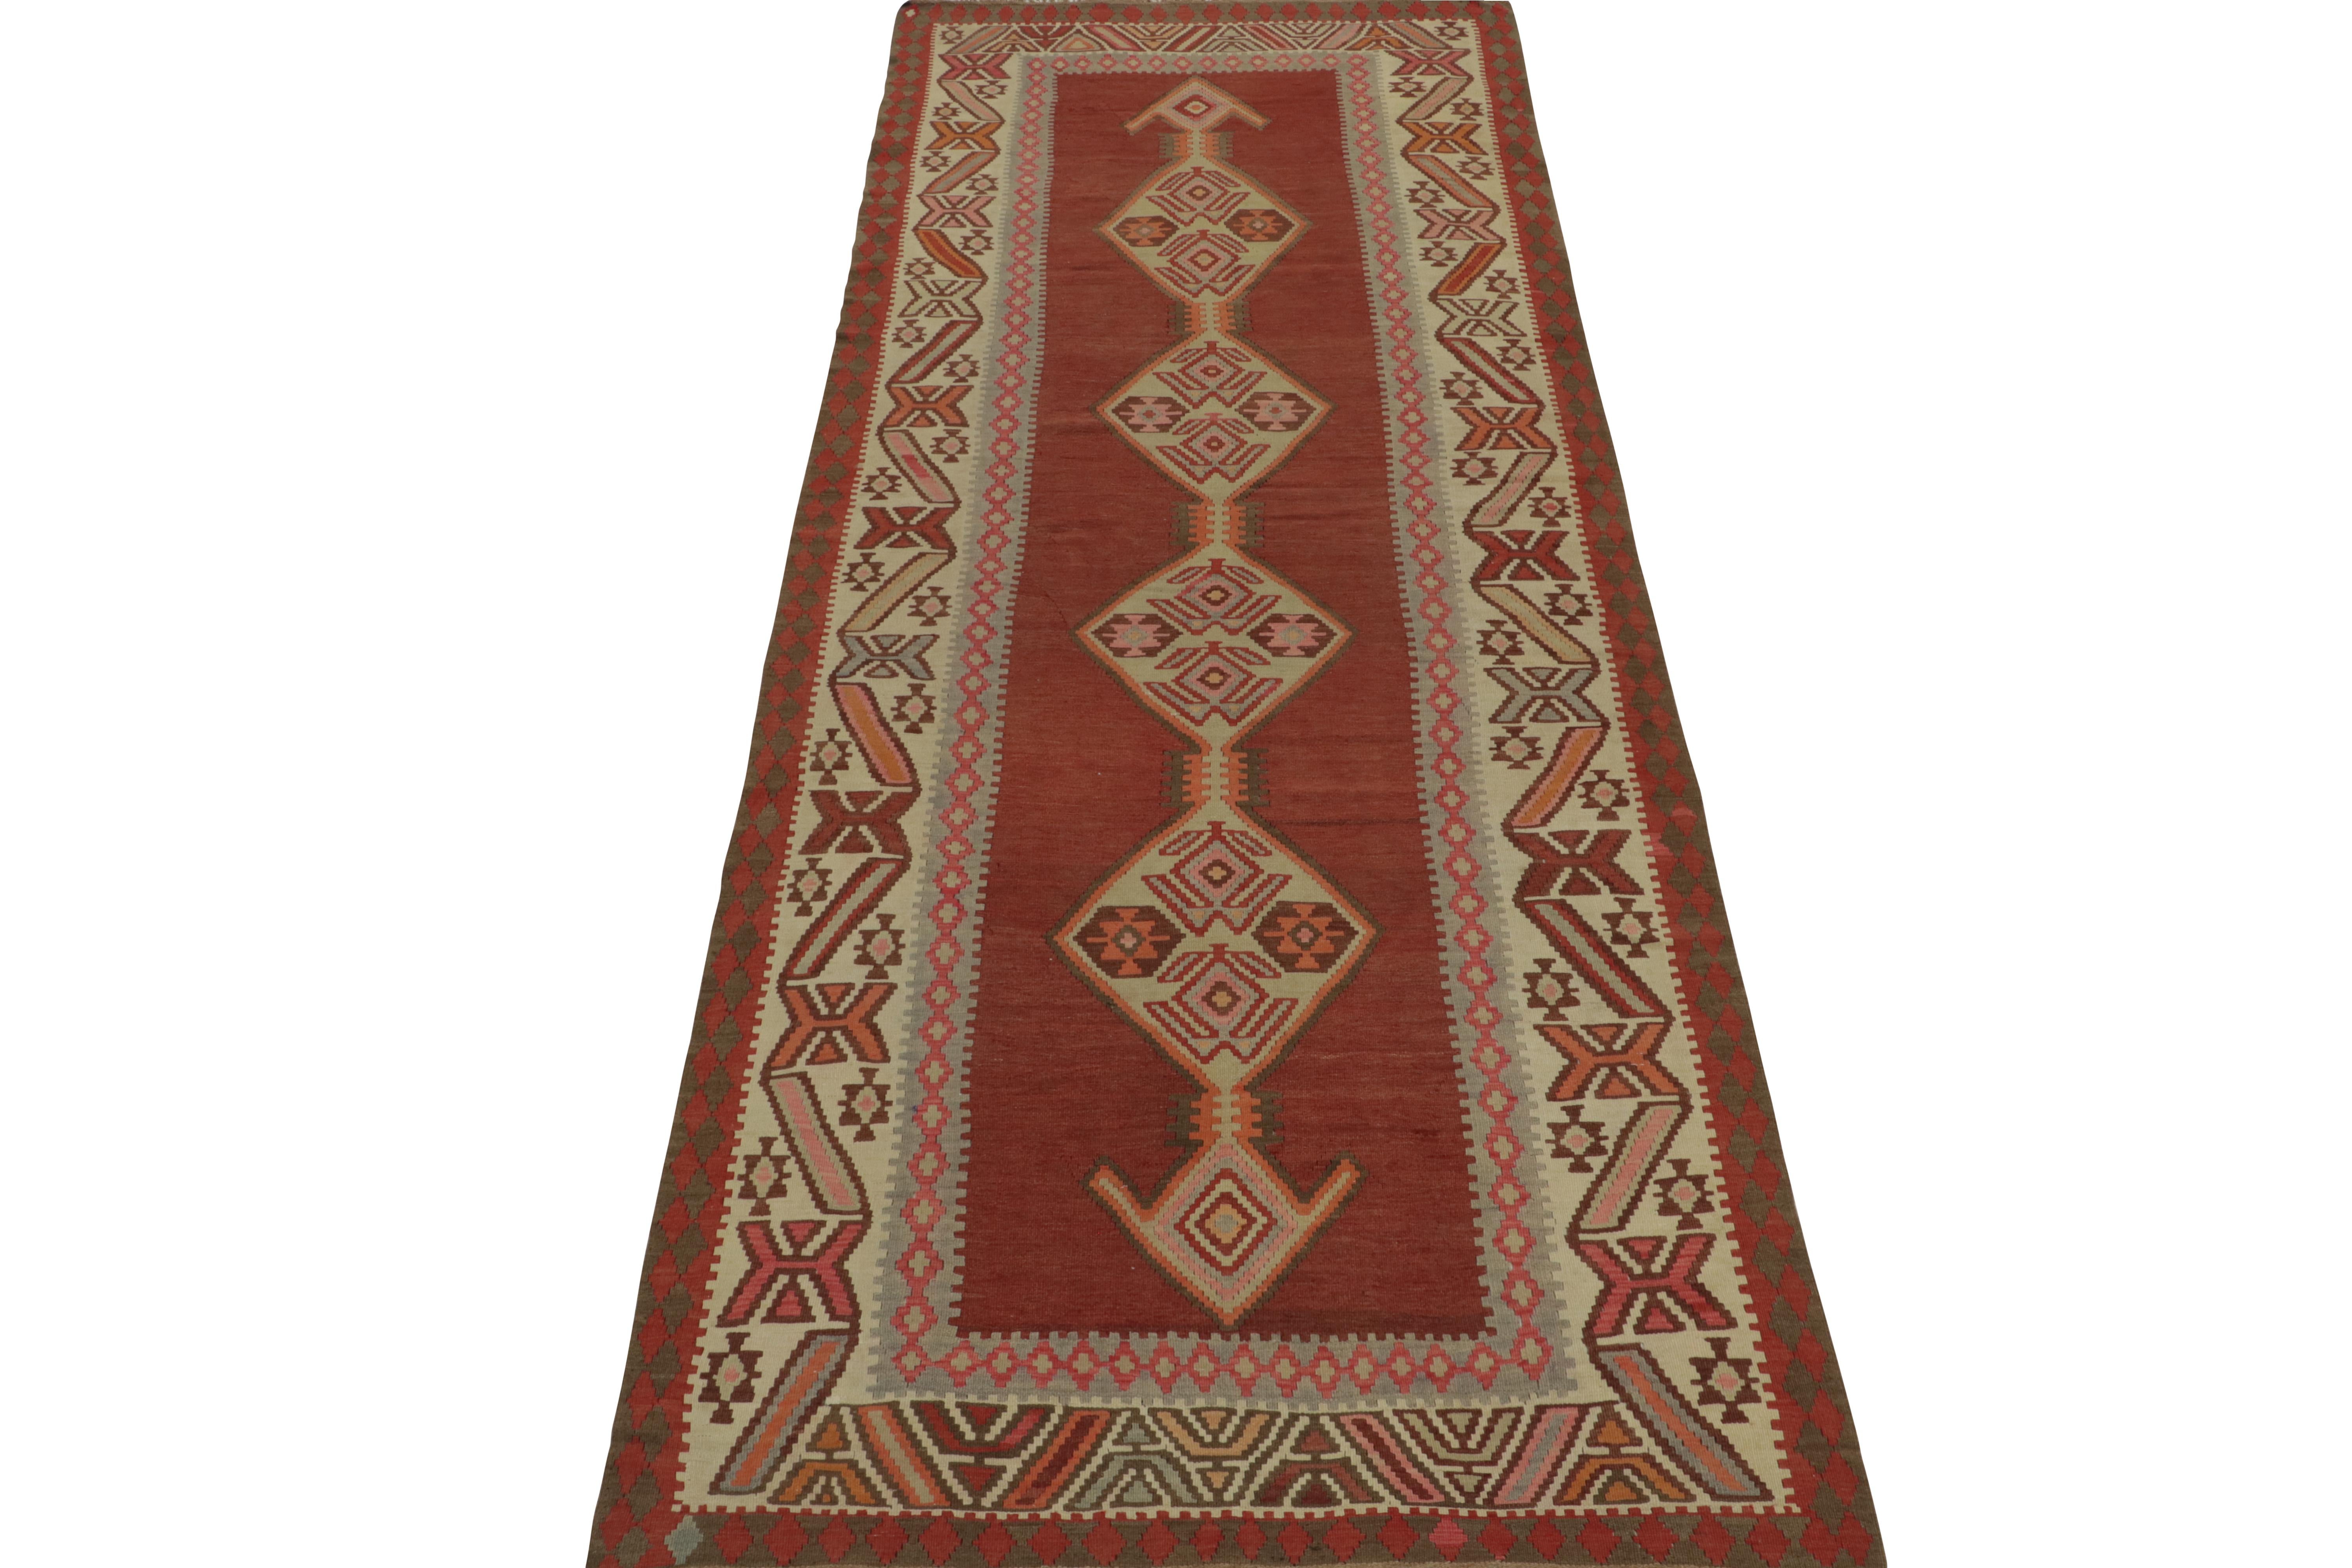 This vintage 6x16 Persian Kilim is a tribal rug from Meshkin—a small northwestern village known for its fabulous long rugs like this gallery runner. Handwoven in wool, it originates circa 1950-1960.

Further on the Design:

The design prefers